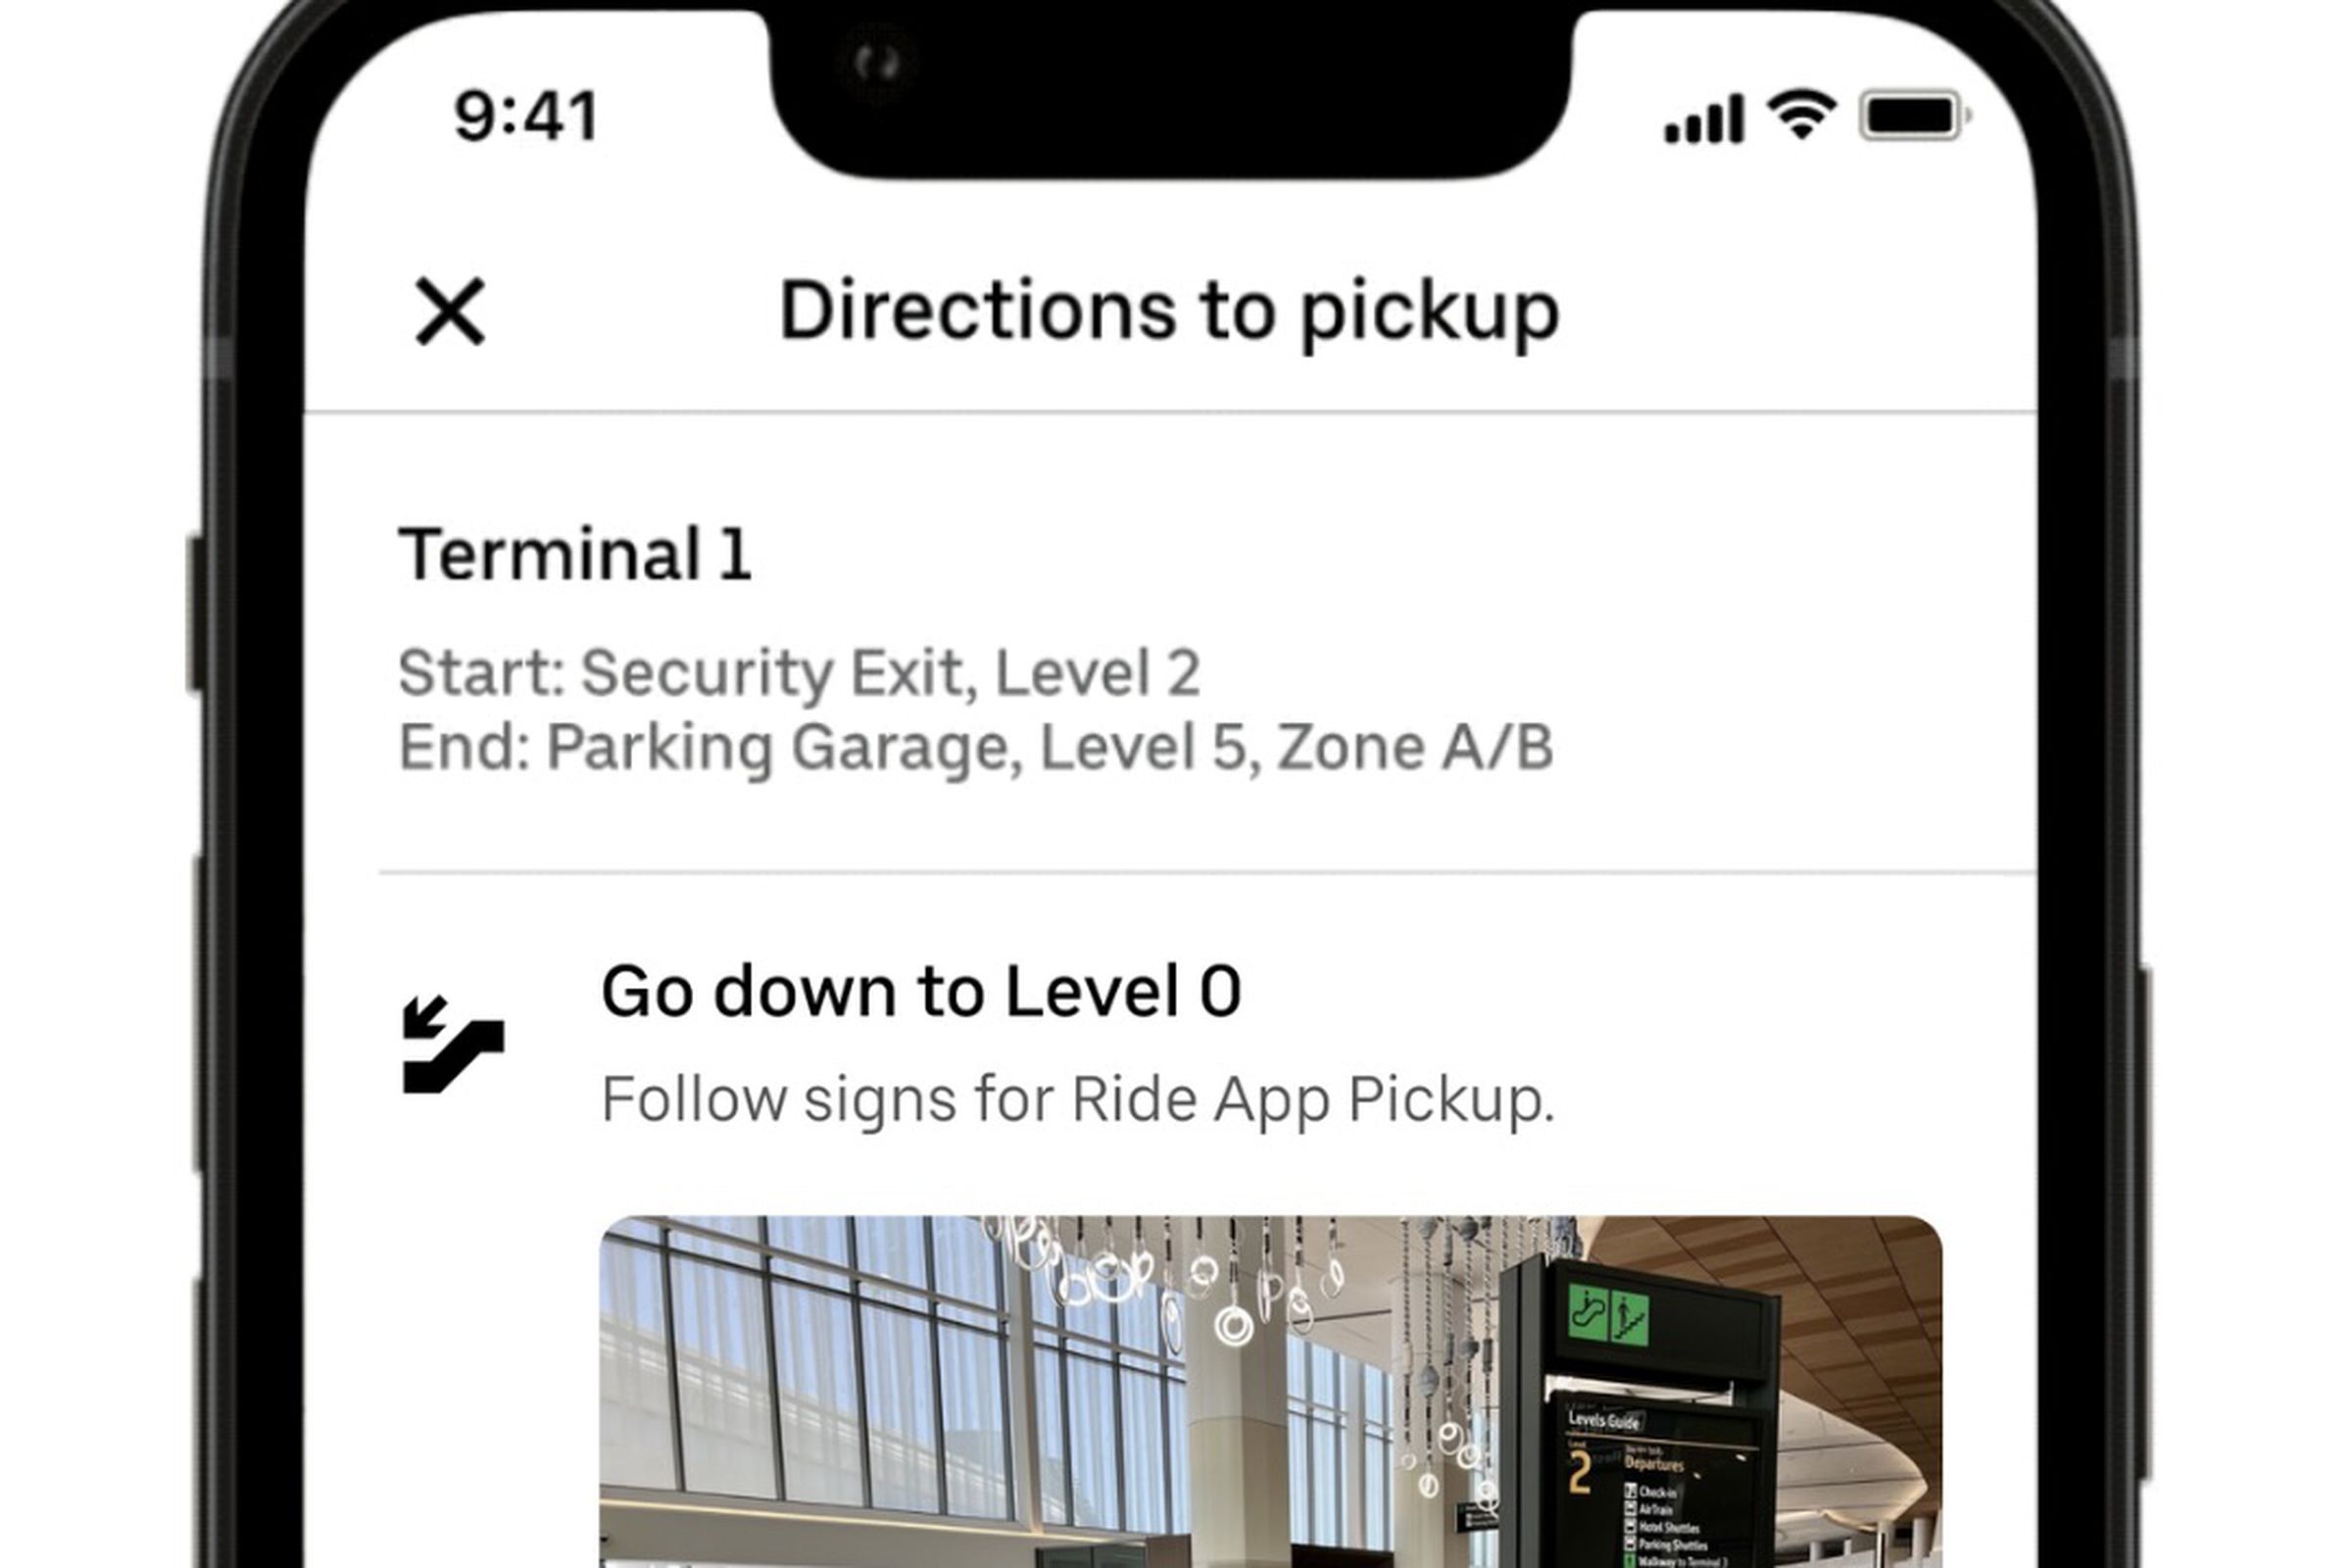 Uber app on an iPhone showing directions to pickup. The instructions for terminal 1 start at security exit, level 2 abd end at parking garage level 5 zone A B.